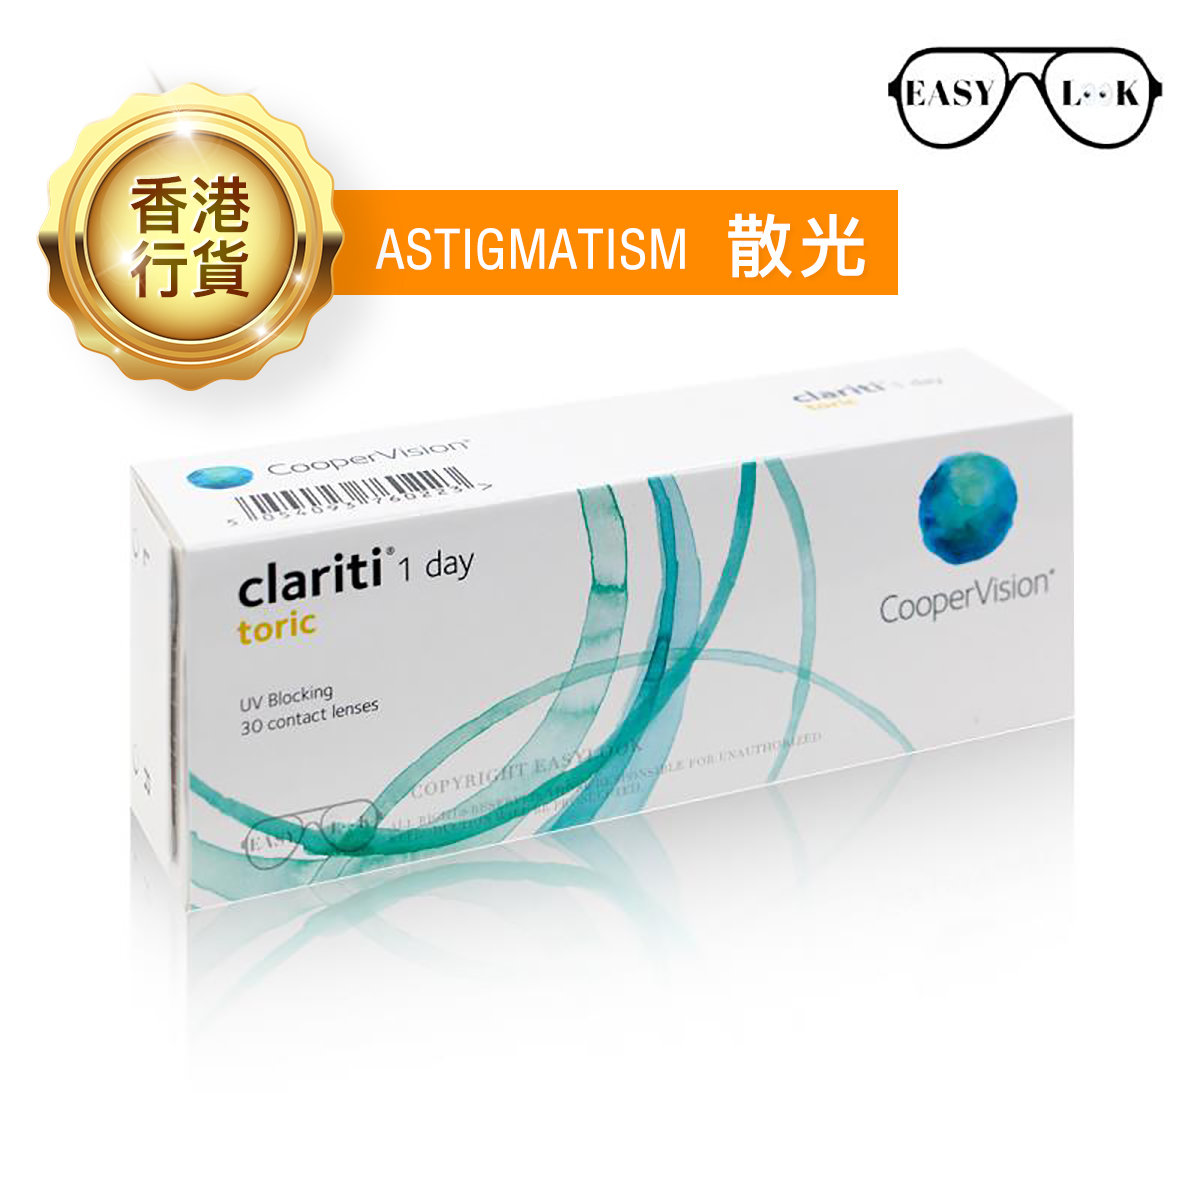 Clariti 1 day Toric Silicone Hydrogel Contact Lens